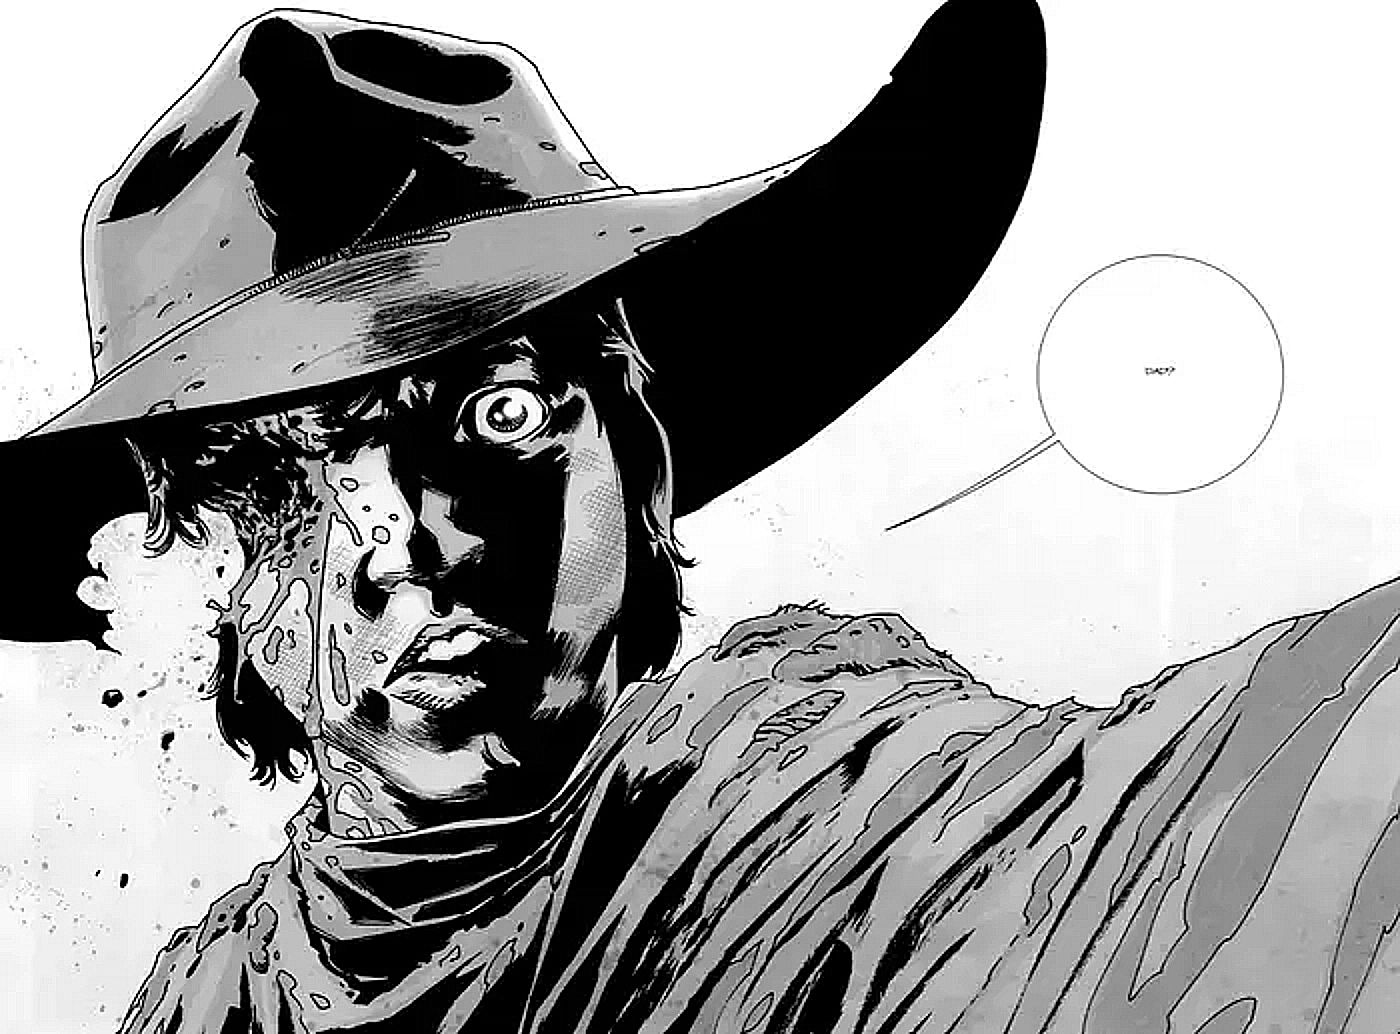 The Walking Dead, Carl loses his eye, in a visual homage to Kraven the Hunter